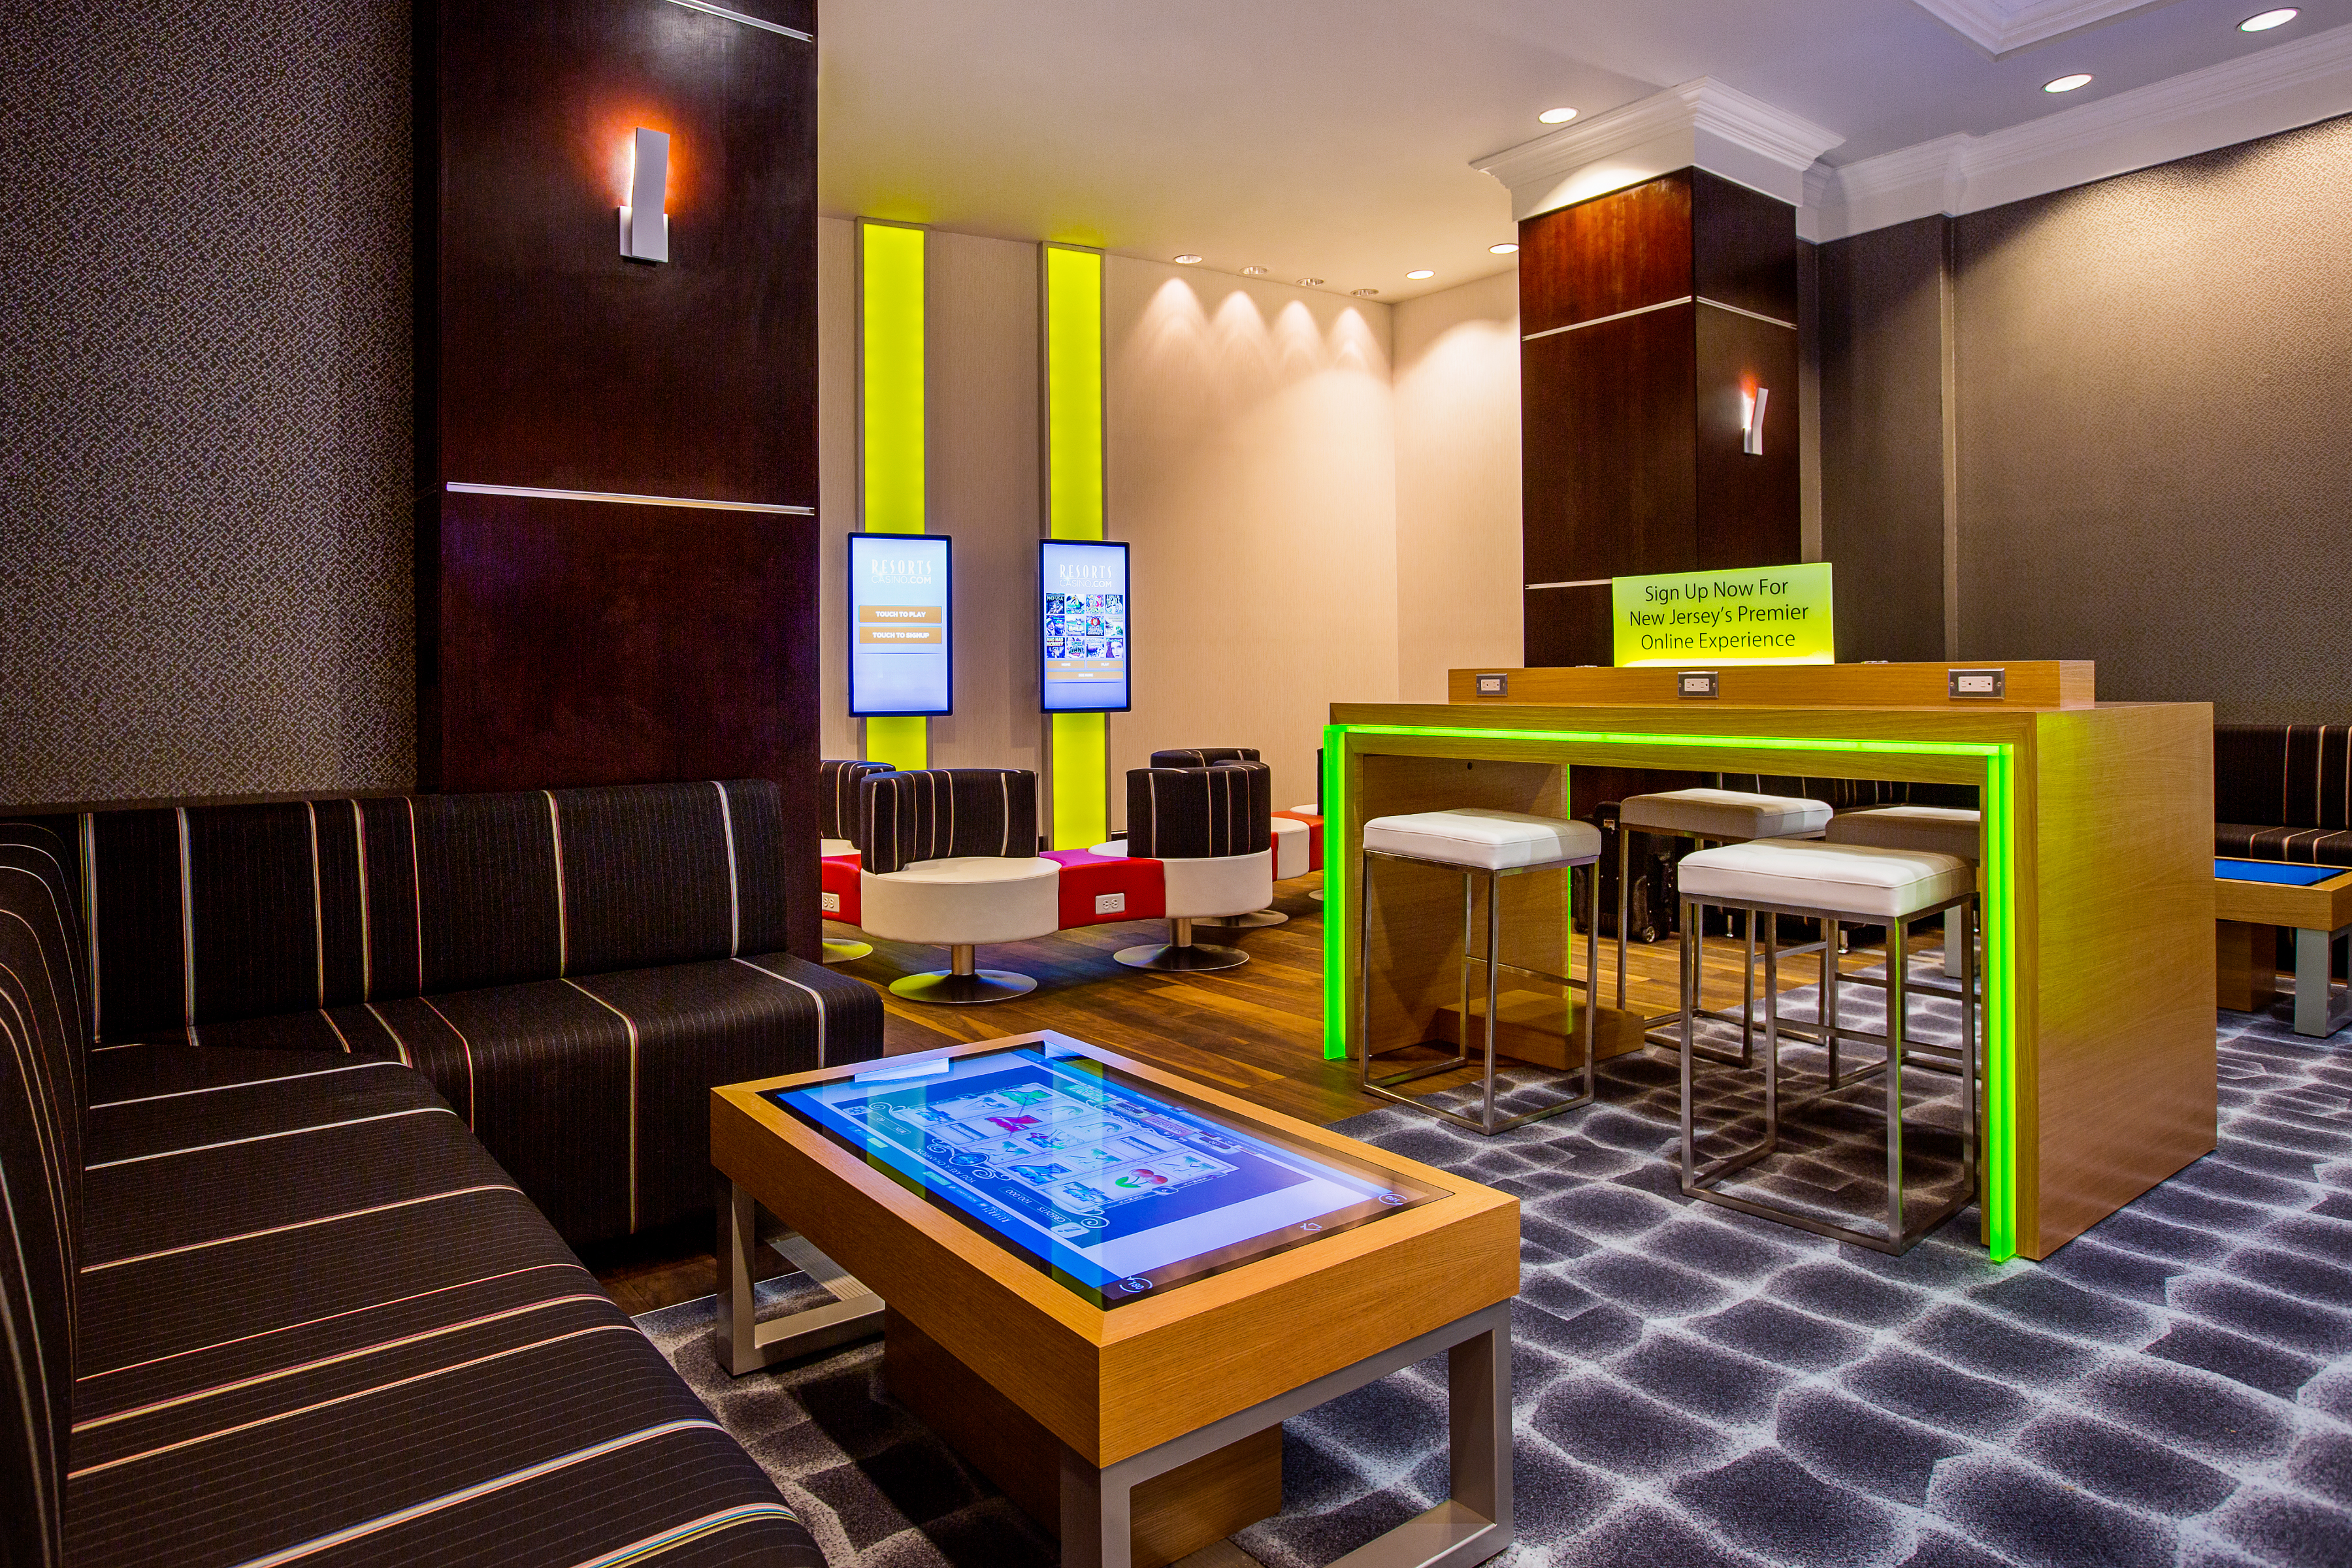 The Resorts iGaming Lounge